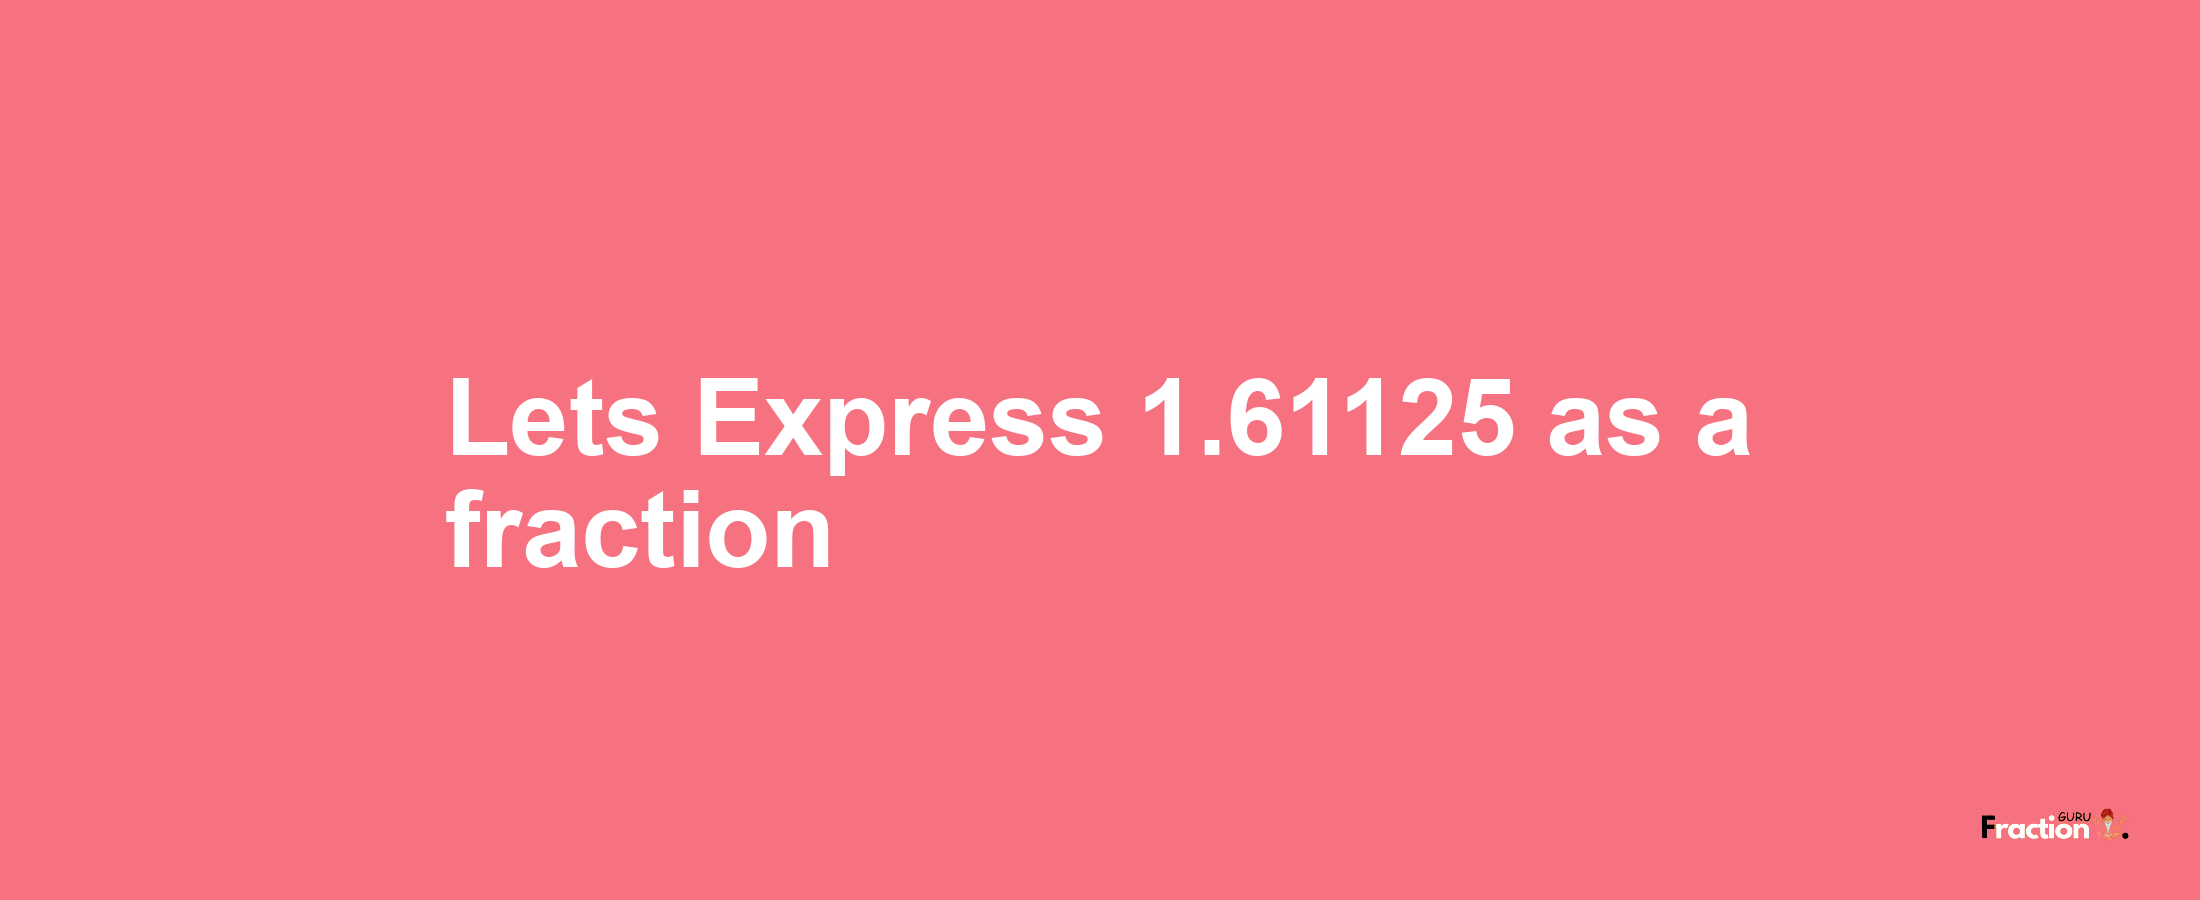 Lets Express 1.61125 as afraction